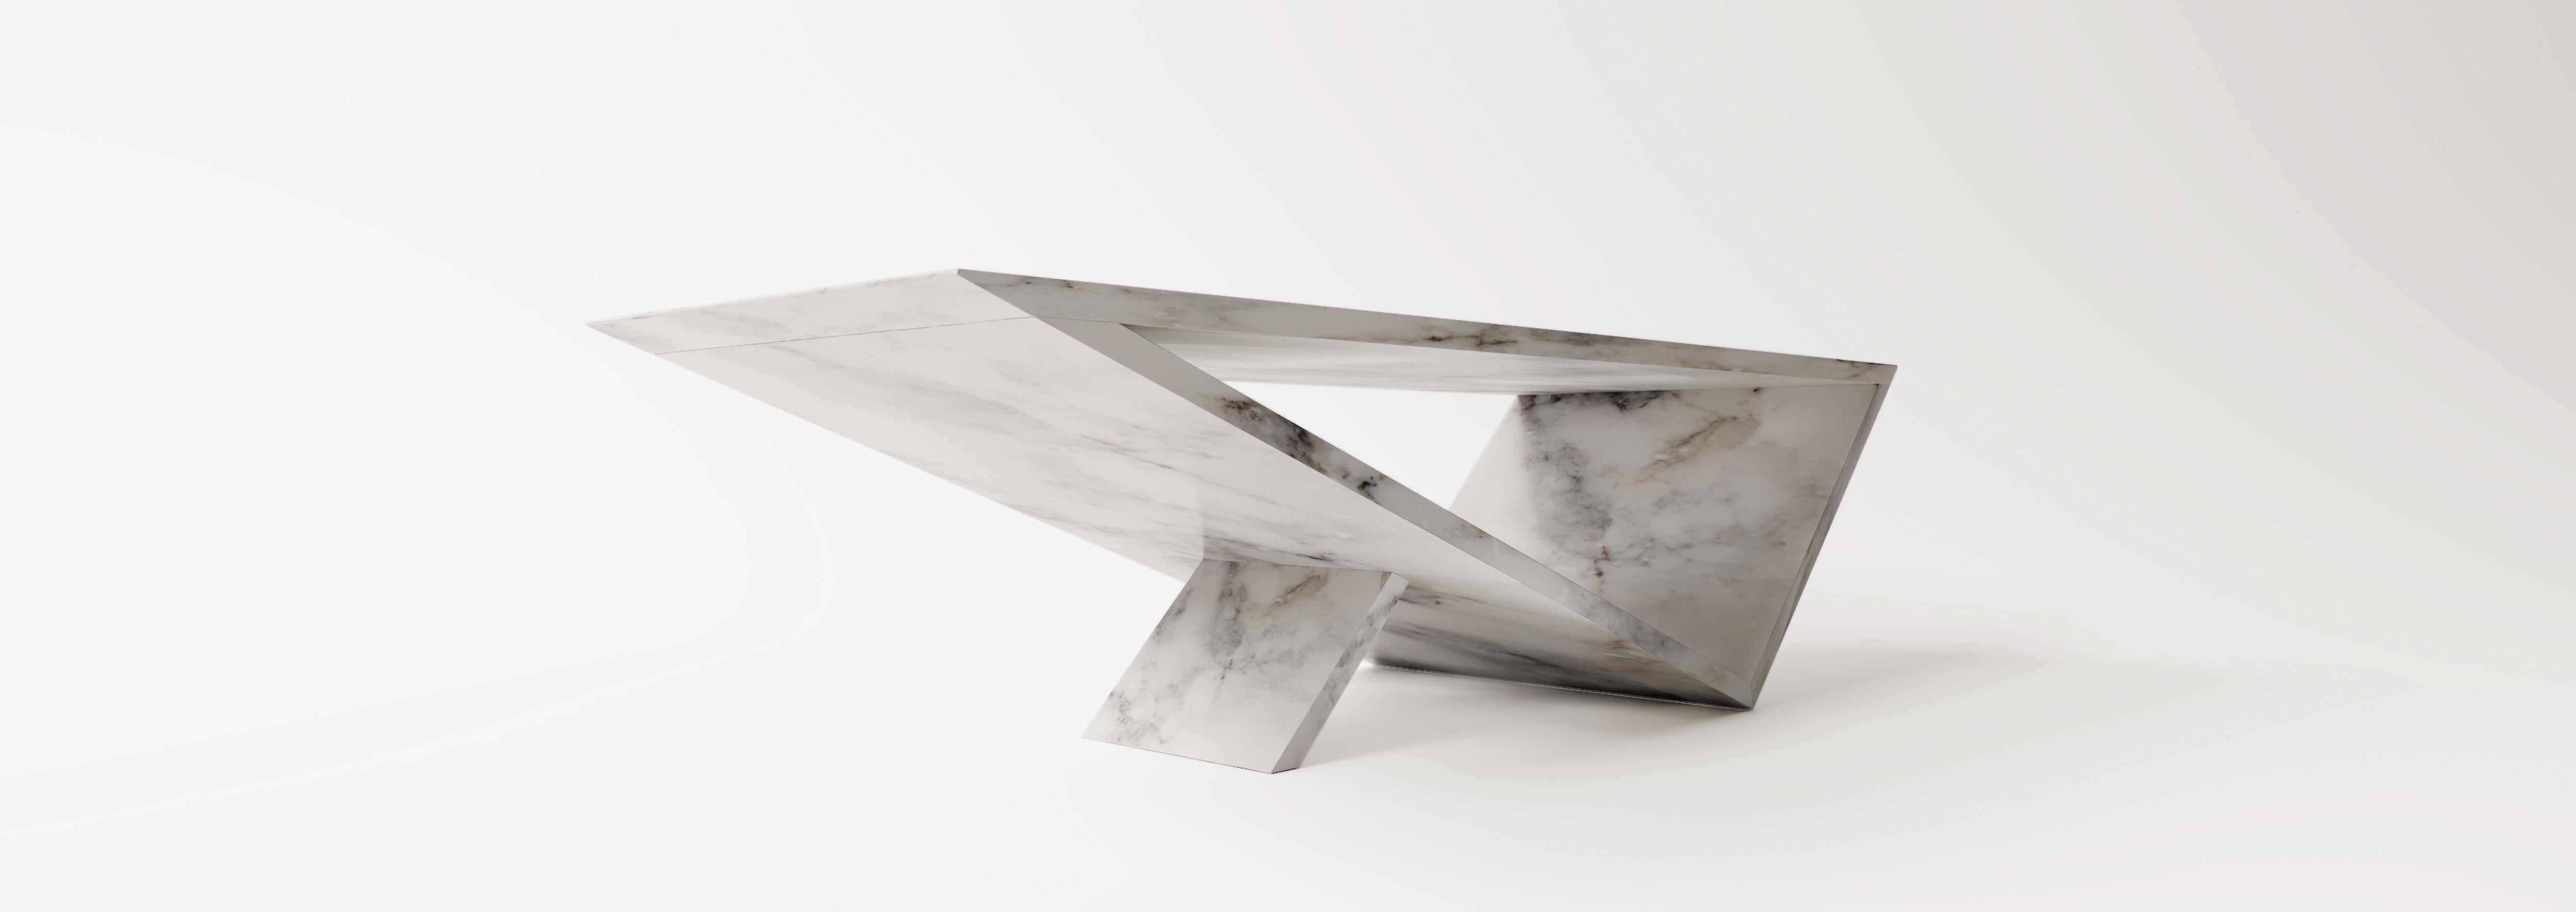 Time/space Portal Coffee Table in Carrara marble.

The inspiration for the Time/Space Portal Table collection comes from the power, simplicity, and elegance of the triangle.
This is an ongoing series exploring the dynamics of balance, weight,